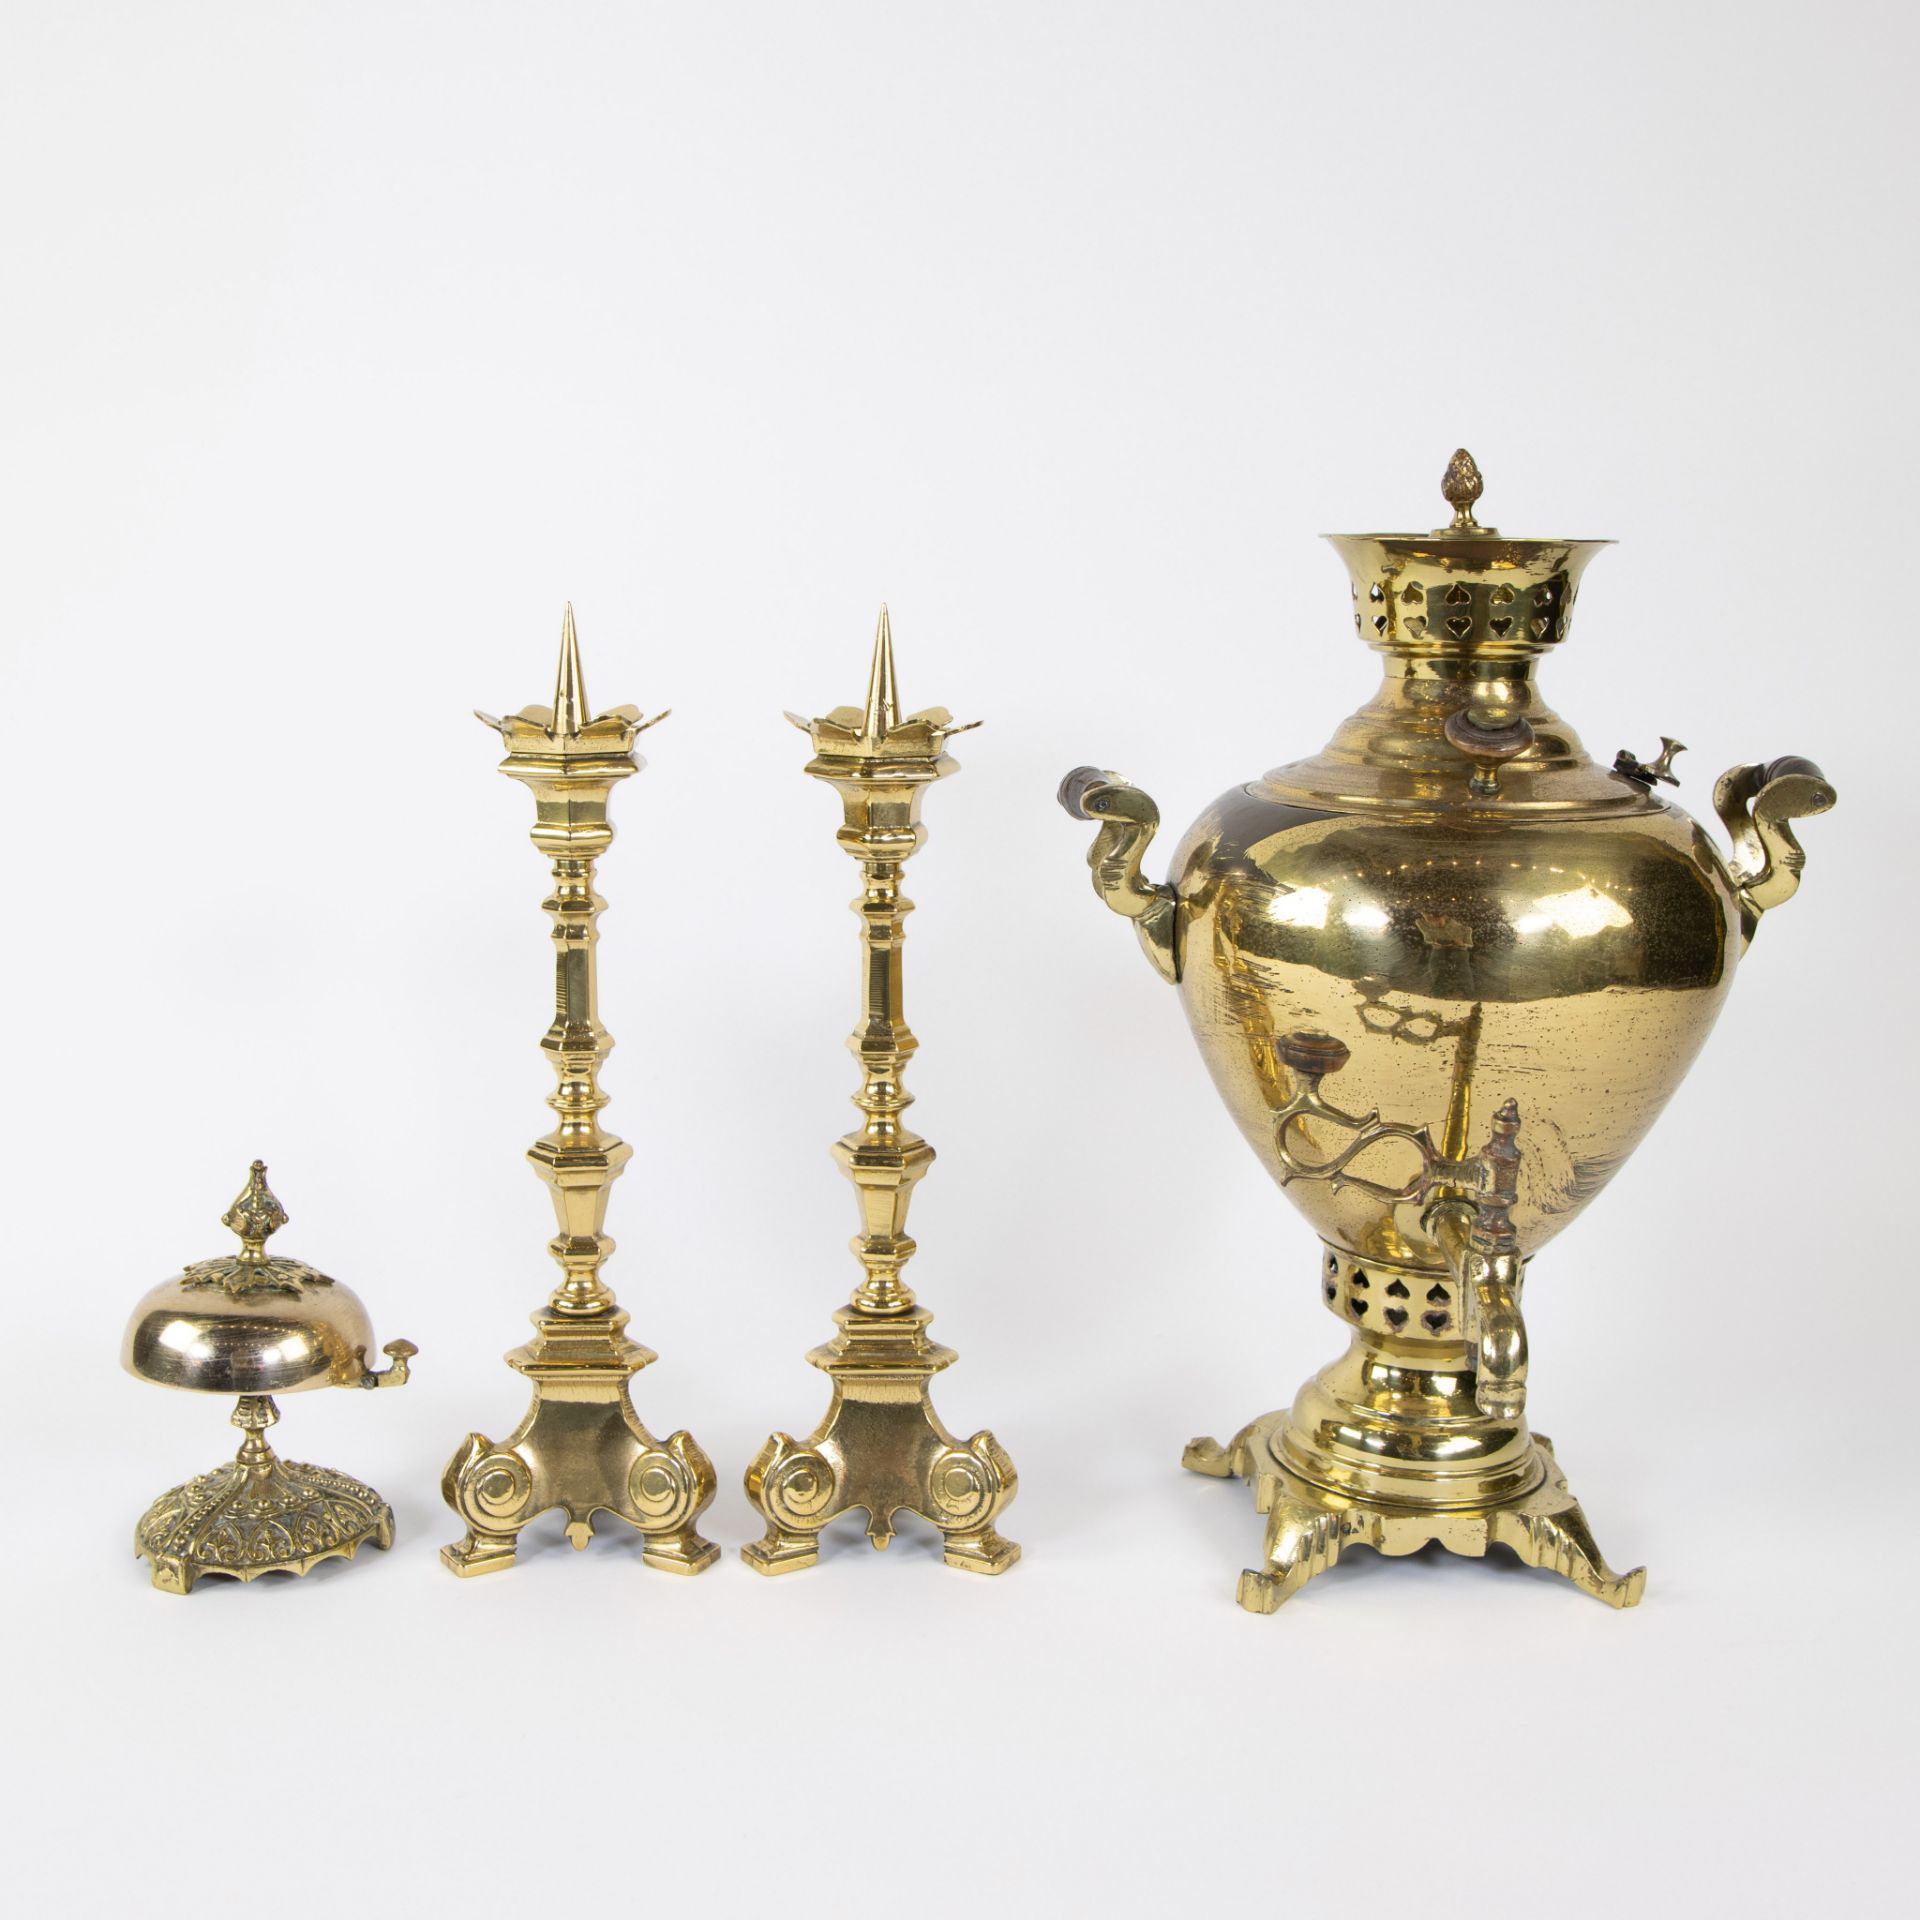 2 yellow copper candlesticks, a Russian samovar and a table bell